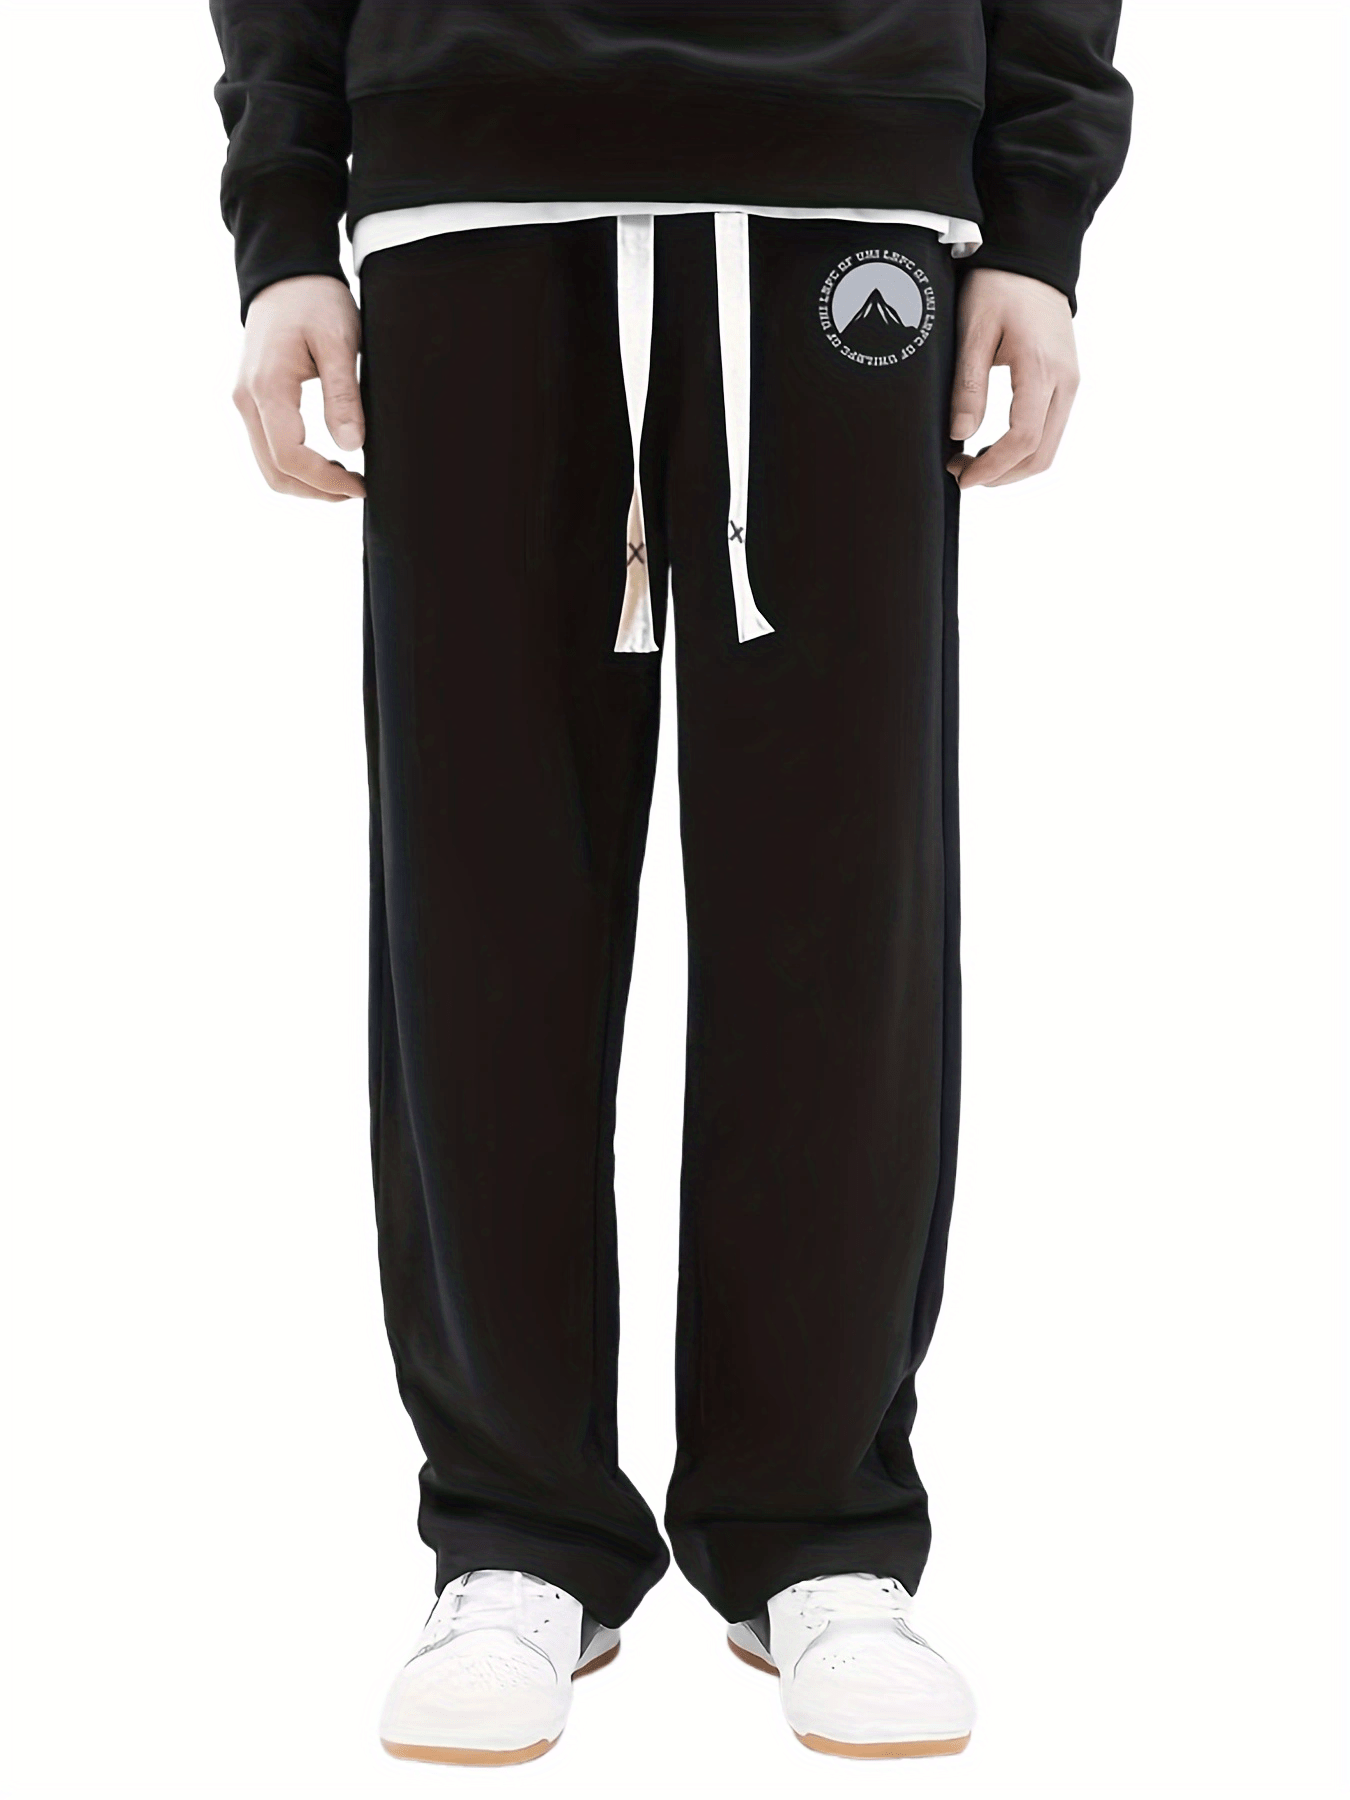 Casual Slightly Stretch Loose Fit Graphic Drawstring Pants, Men's